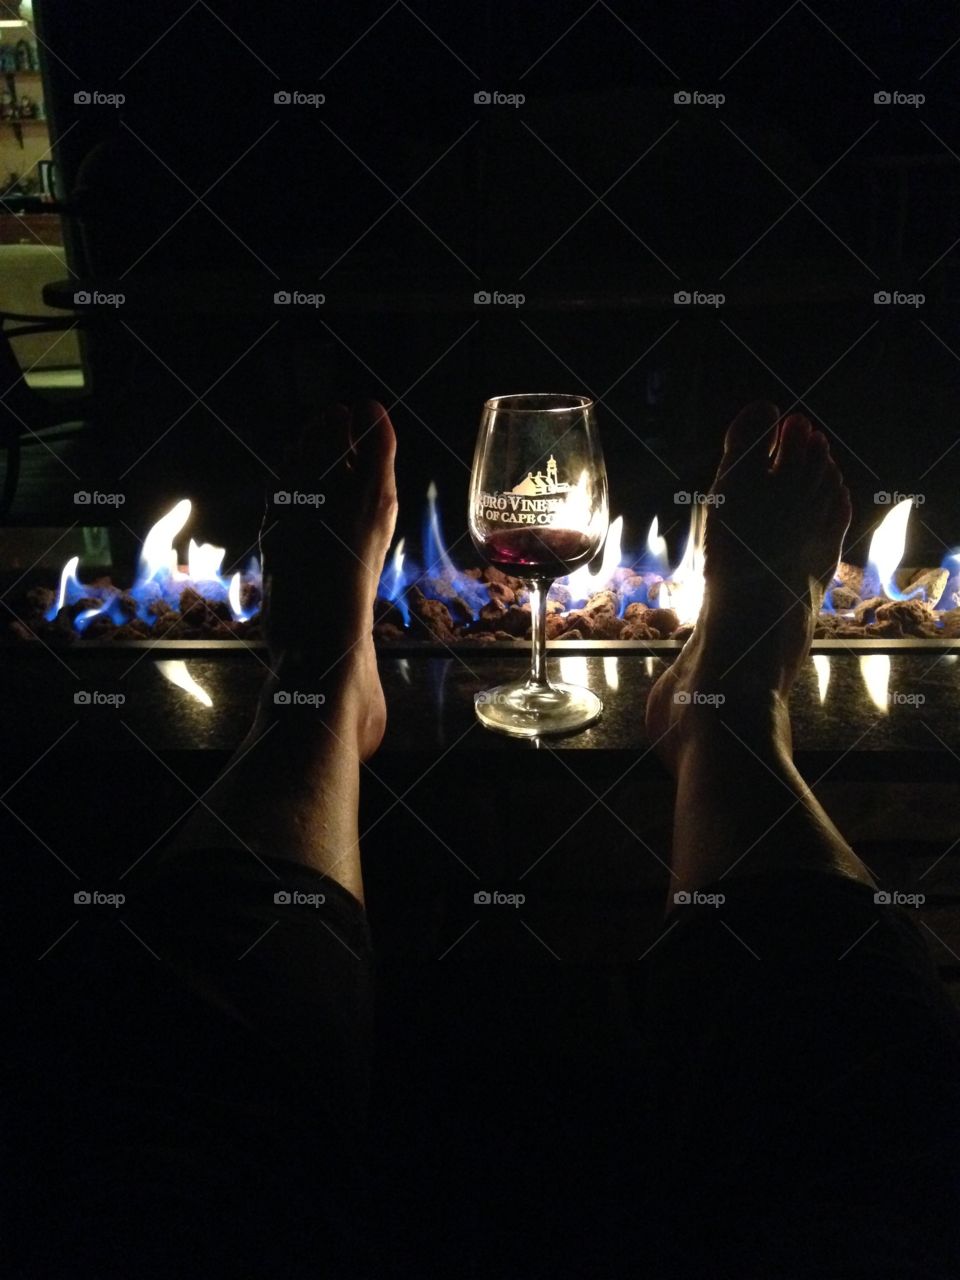 Feet and fire